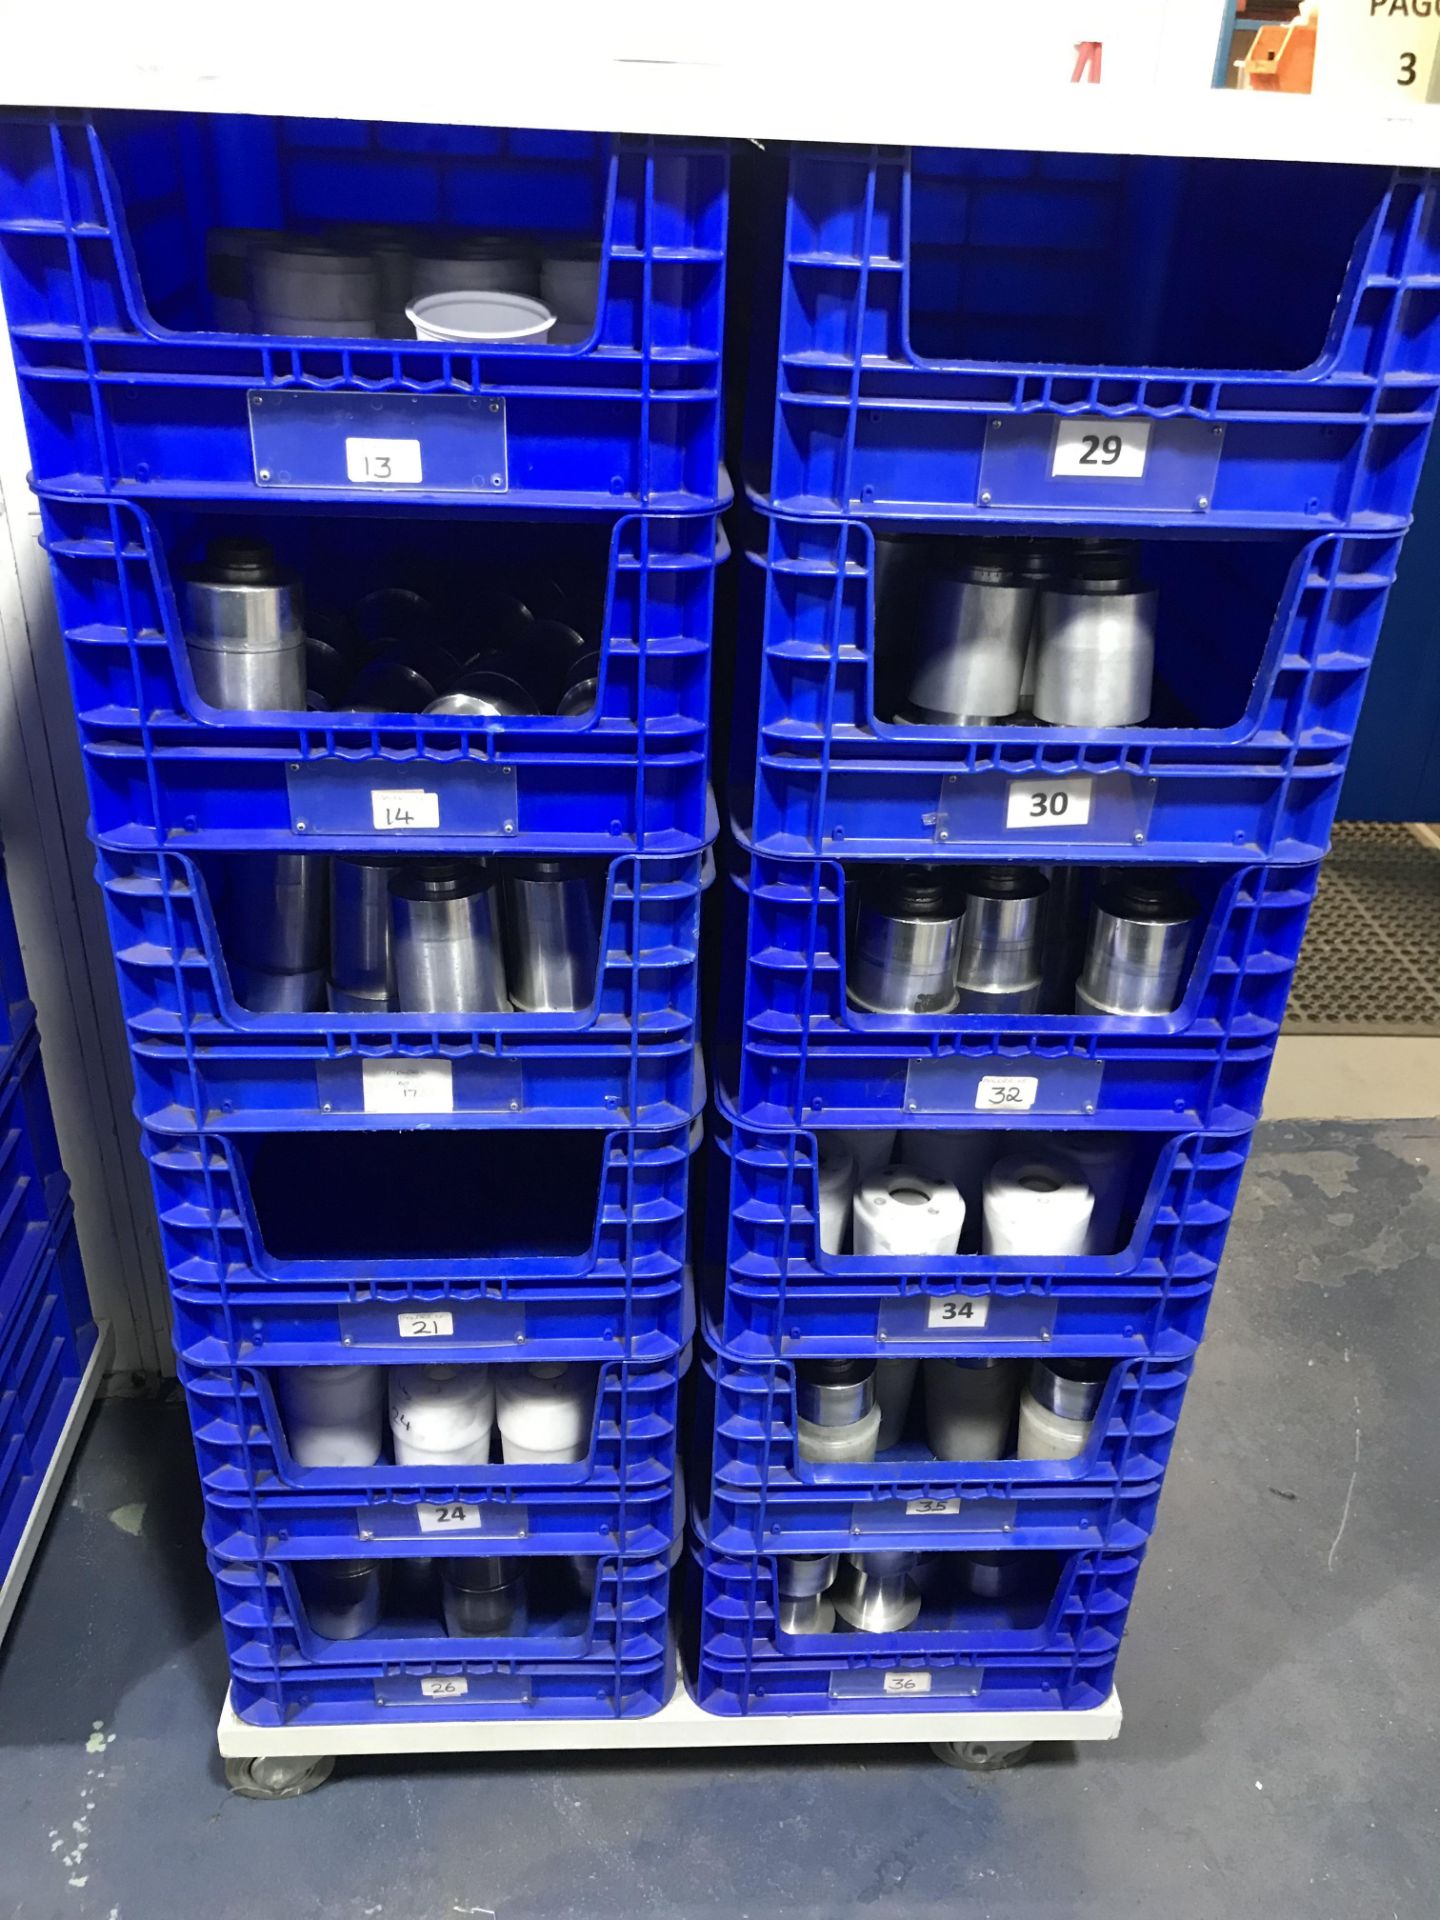 MOBILE 12-WAY BLUE PLASTIC BIN STORAGE UNIT AND CONTENTS OF PAGO MANDRELS